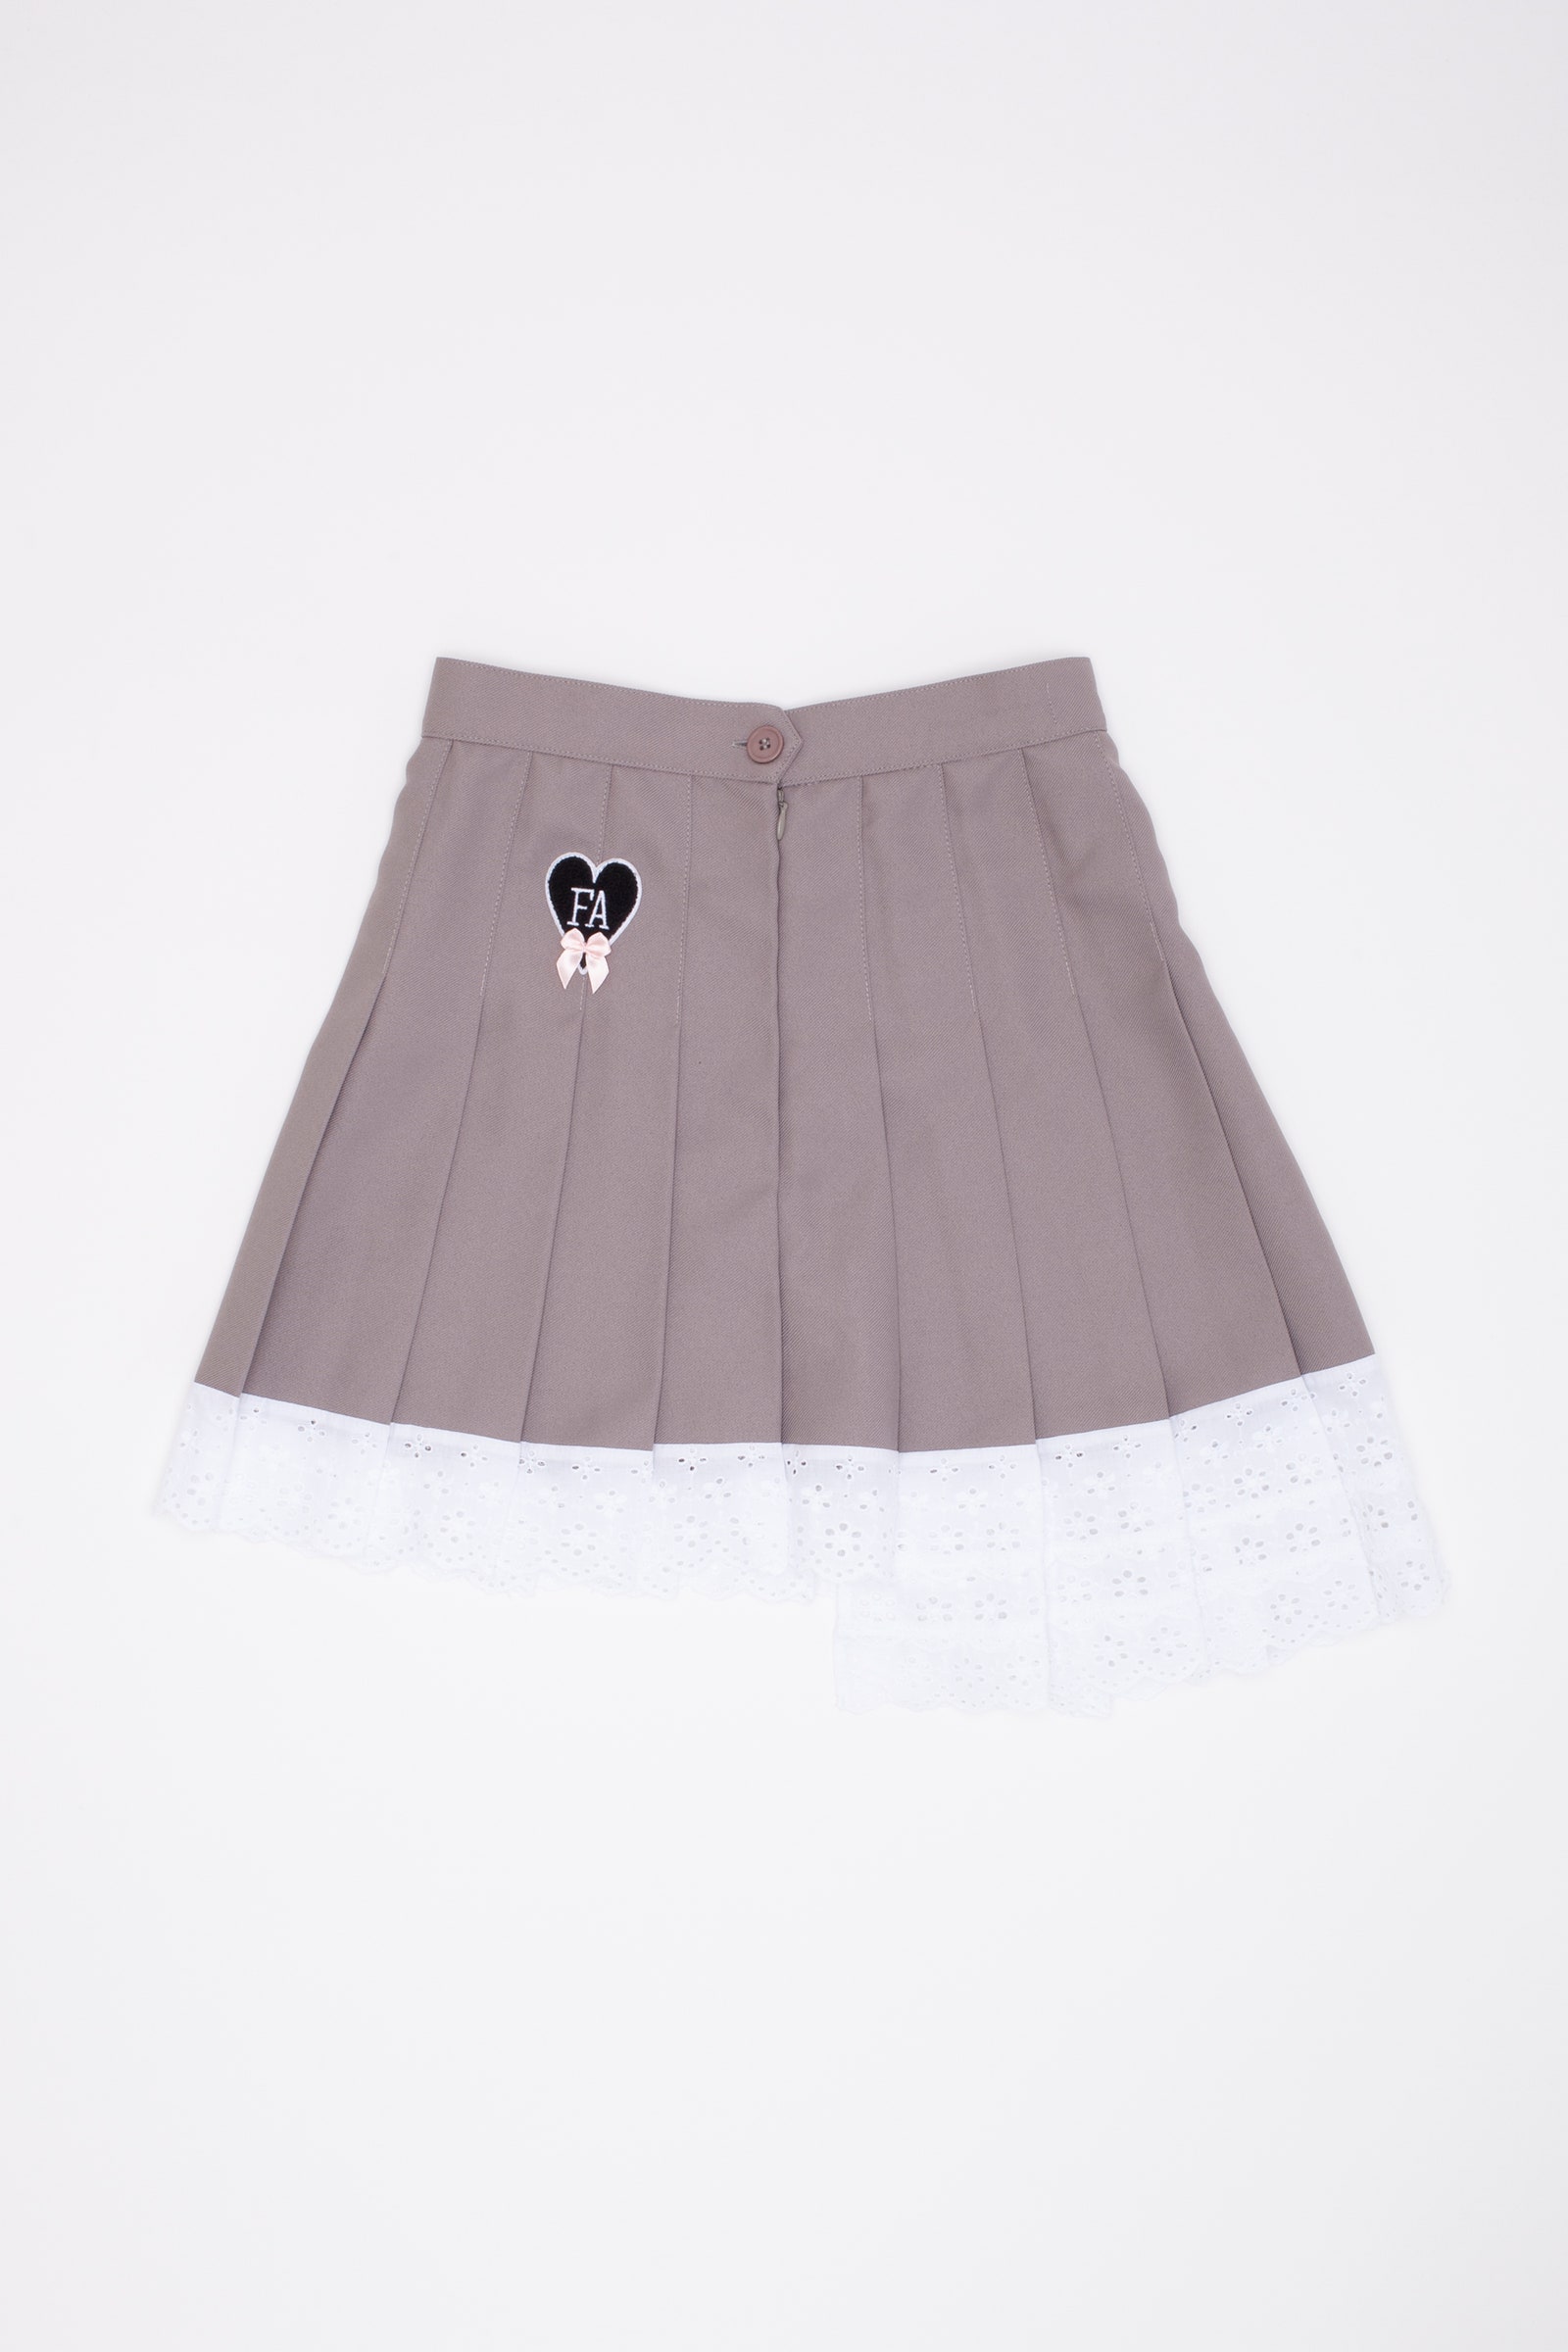 A gray tennis skirt with a black heart patch and lace trim.